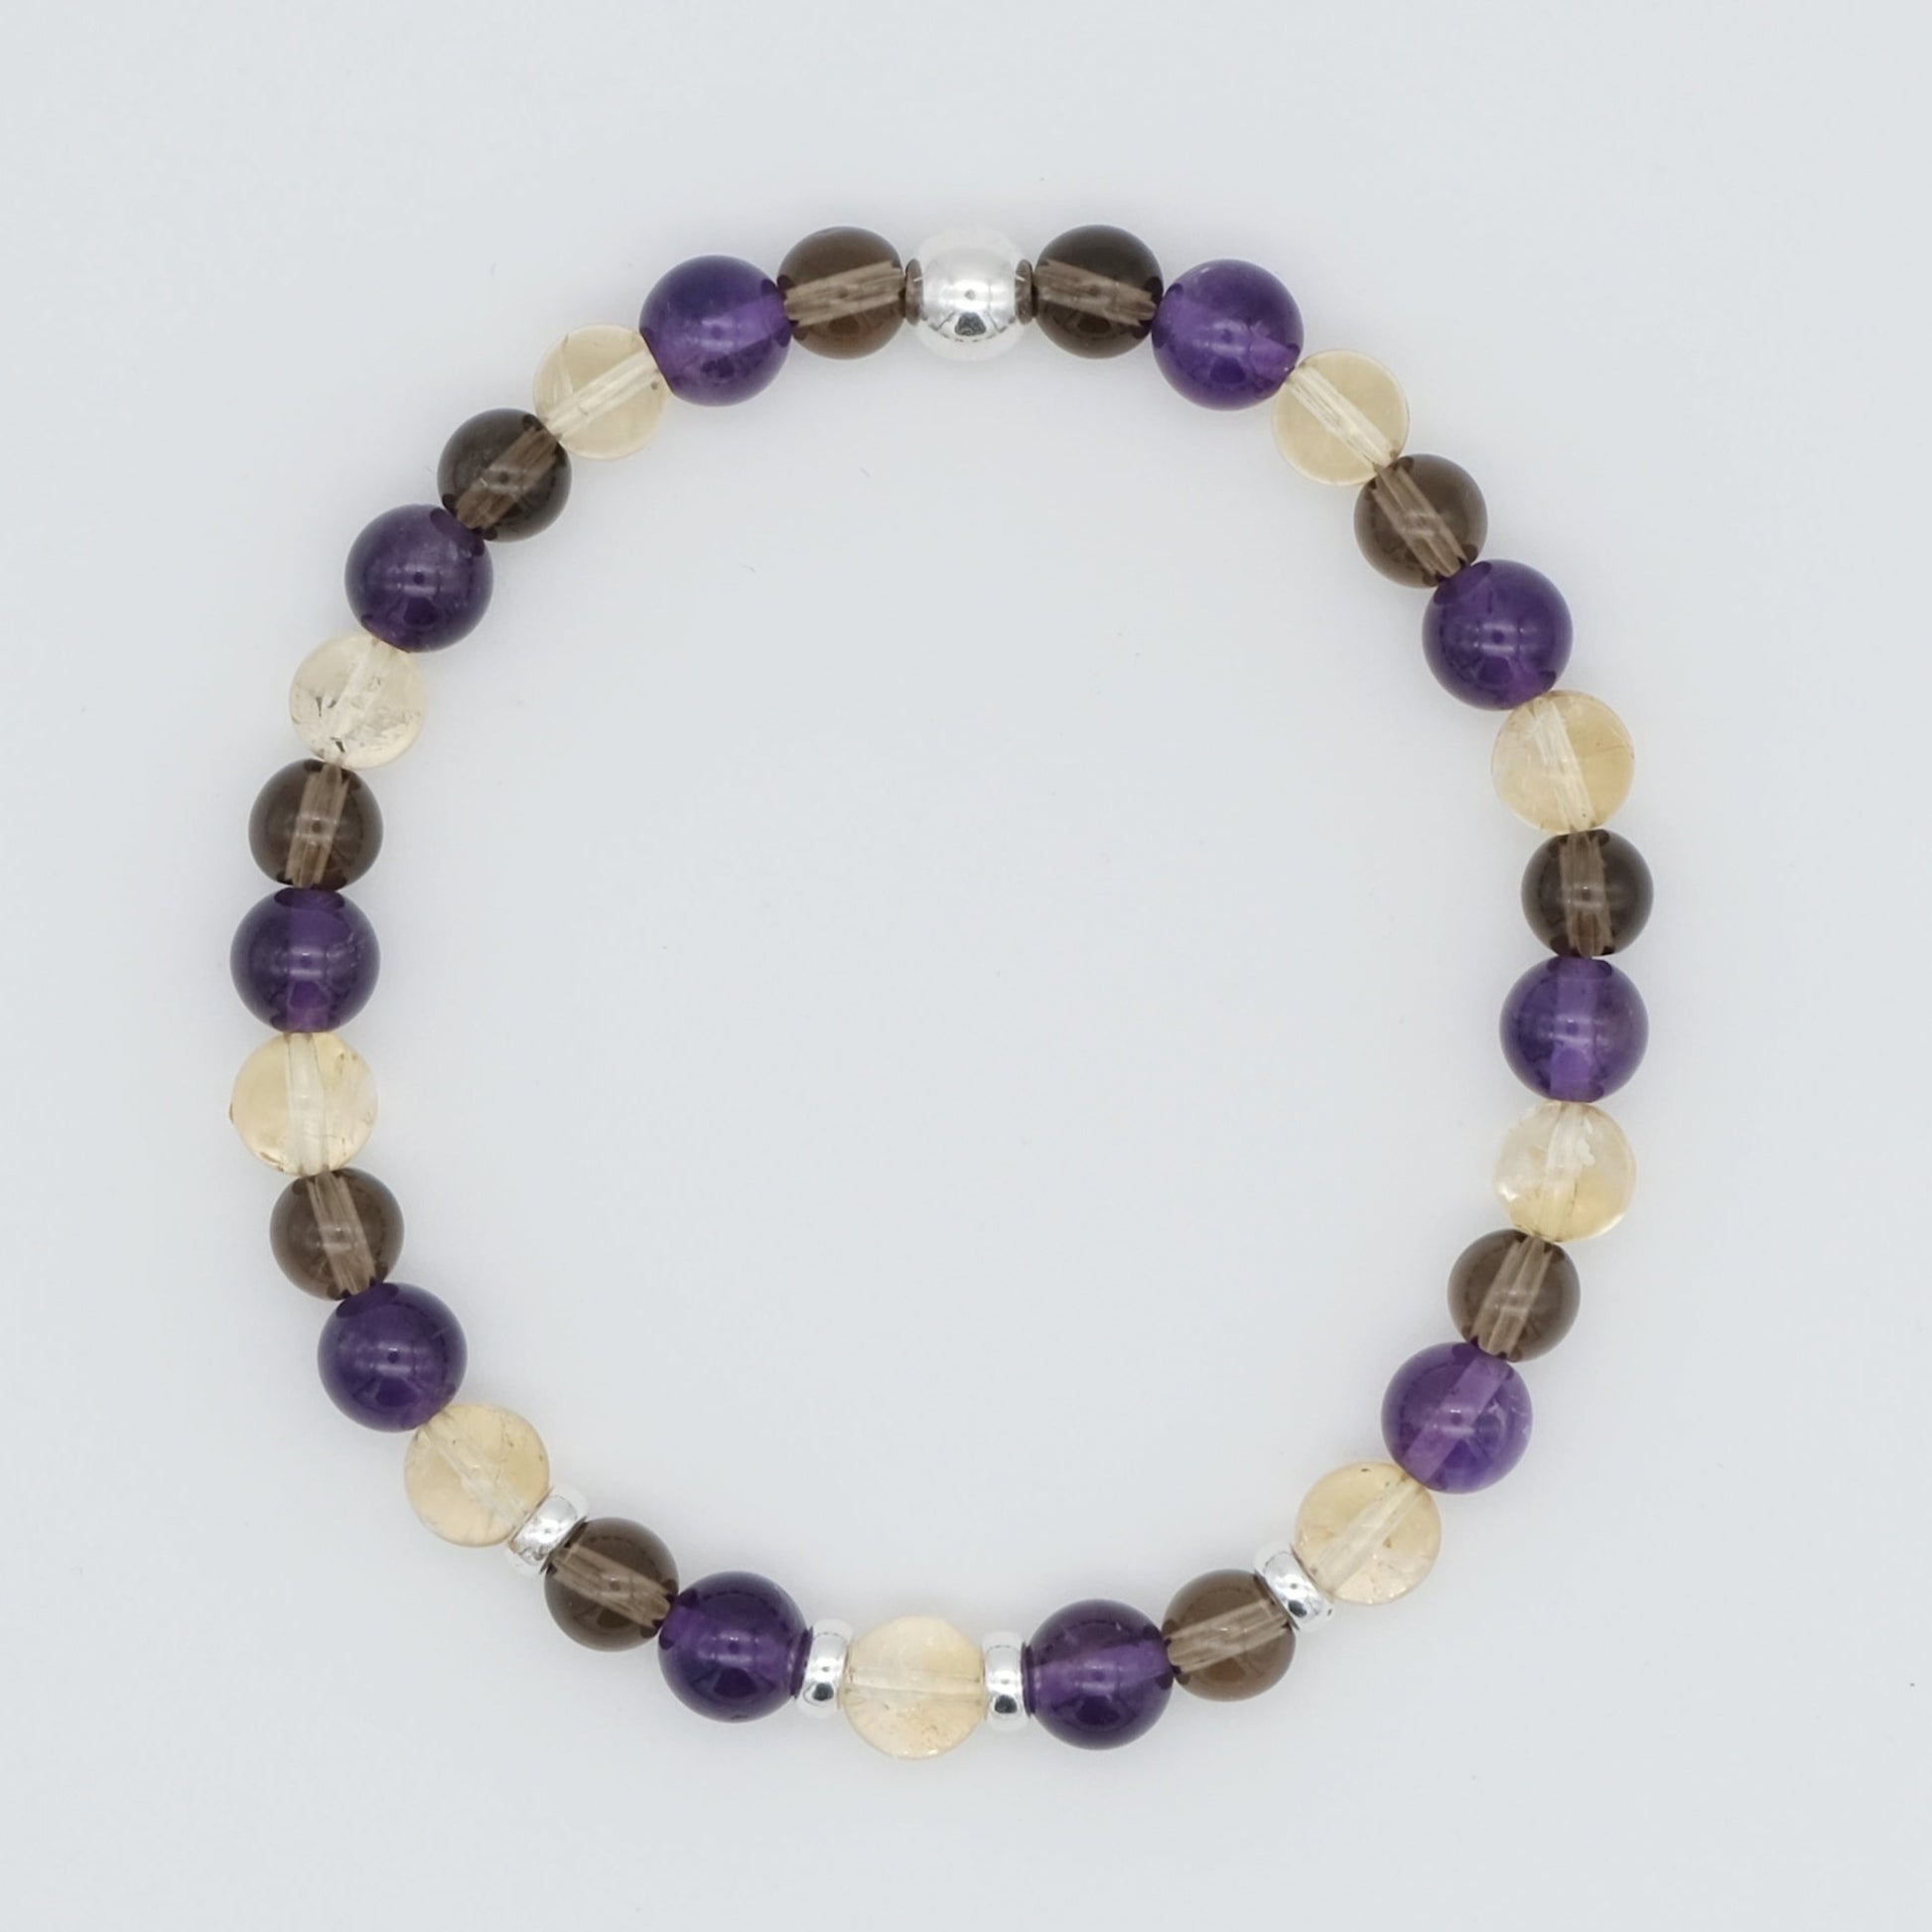 An Amethyst, citrine and smoky quartz gemstone bracelet in 6mm beads with silver accessories from above